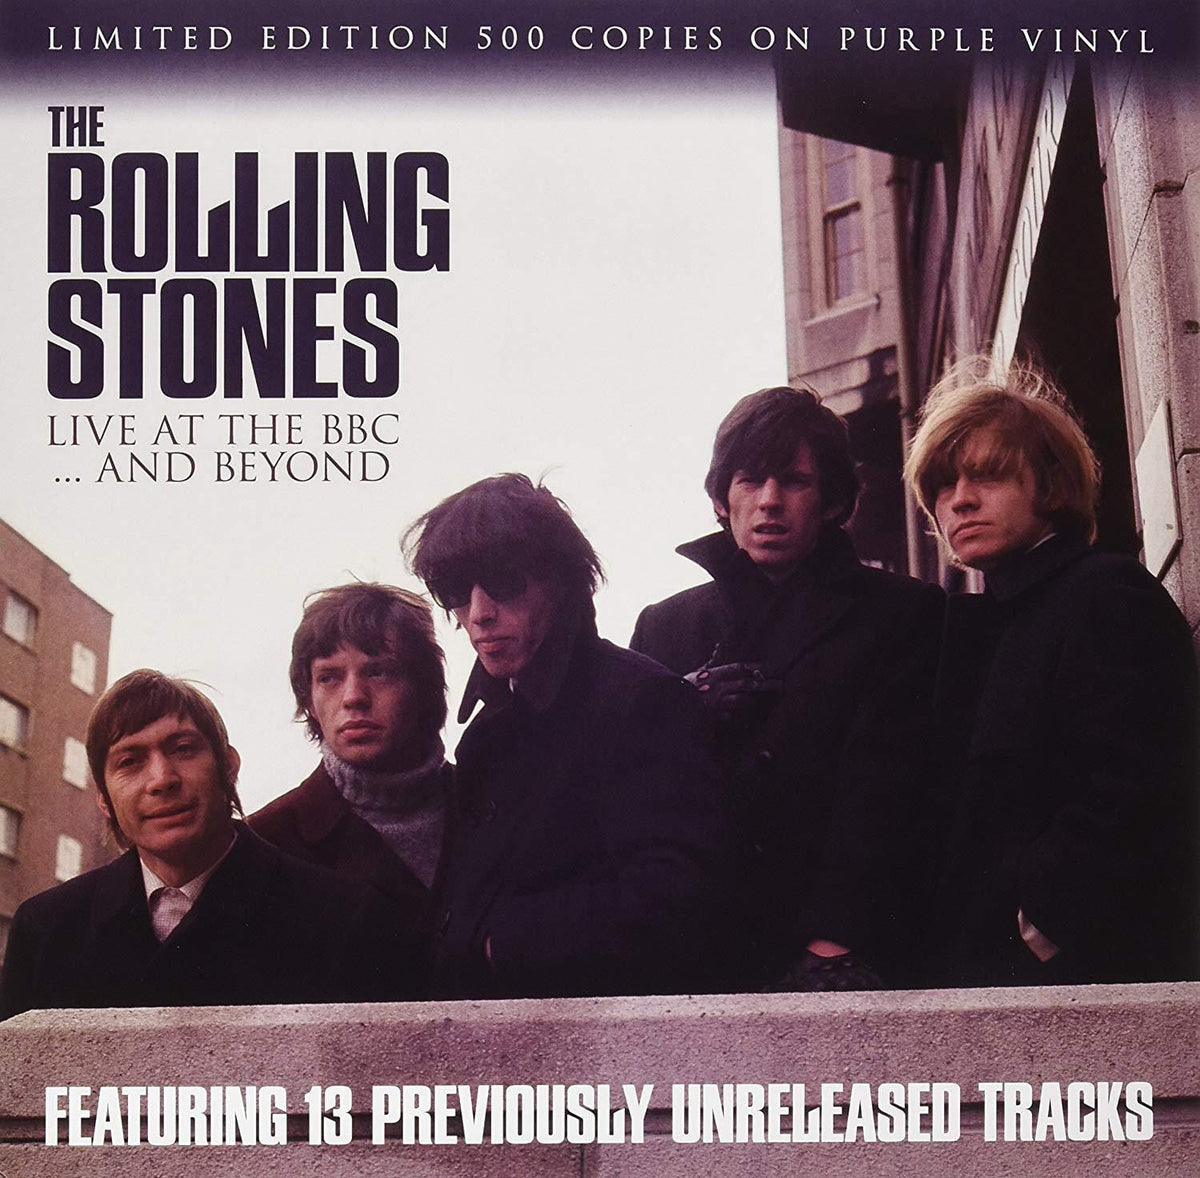 THE ROLLING STONES: LIVE AT THE BBC... AND BEYOND [VINYL]